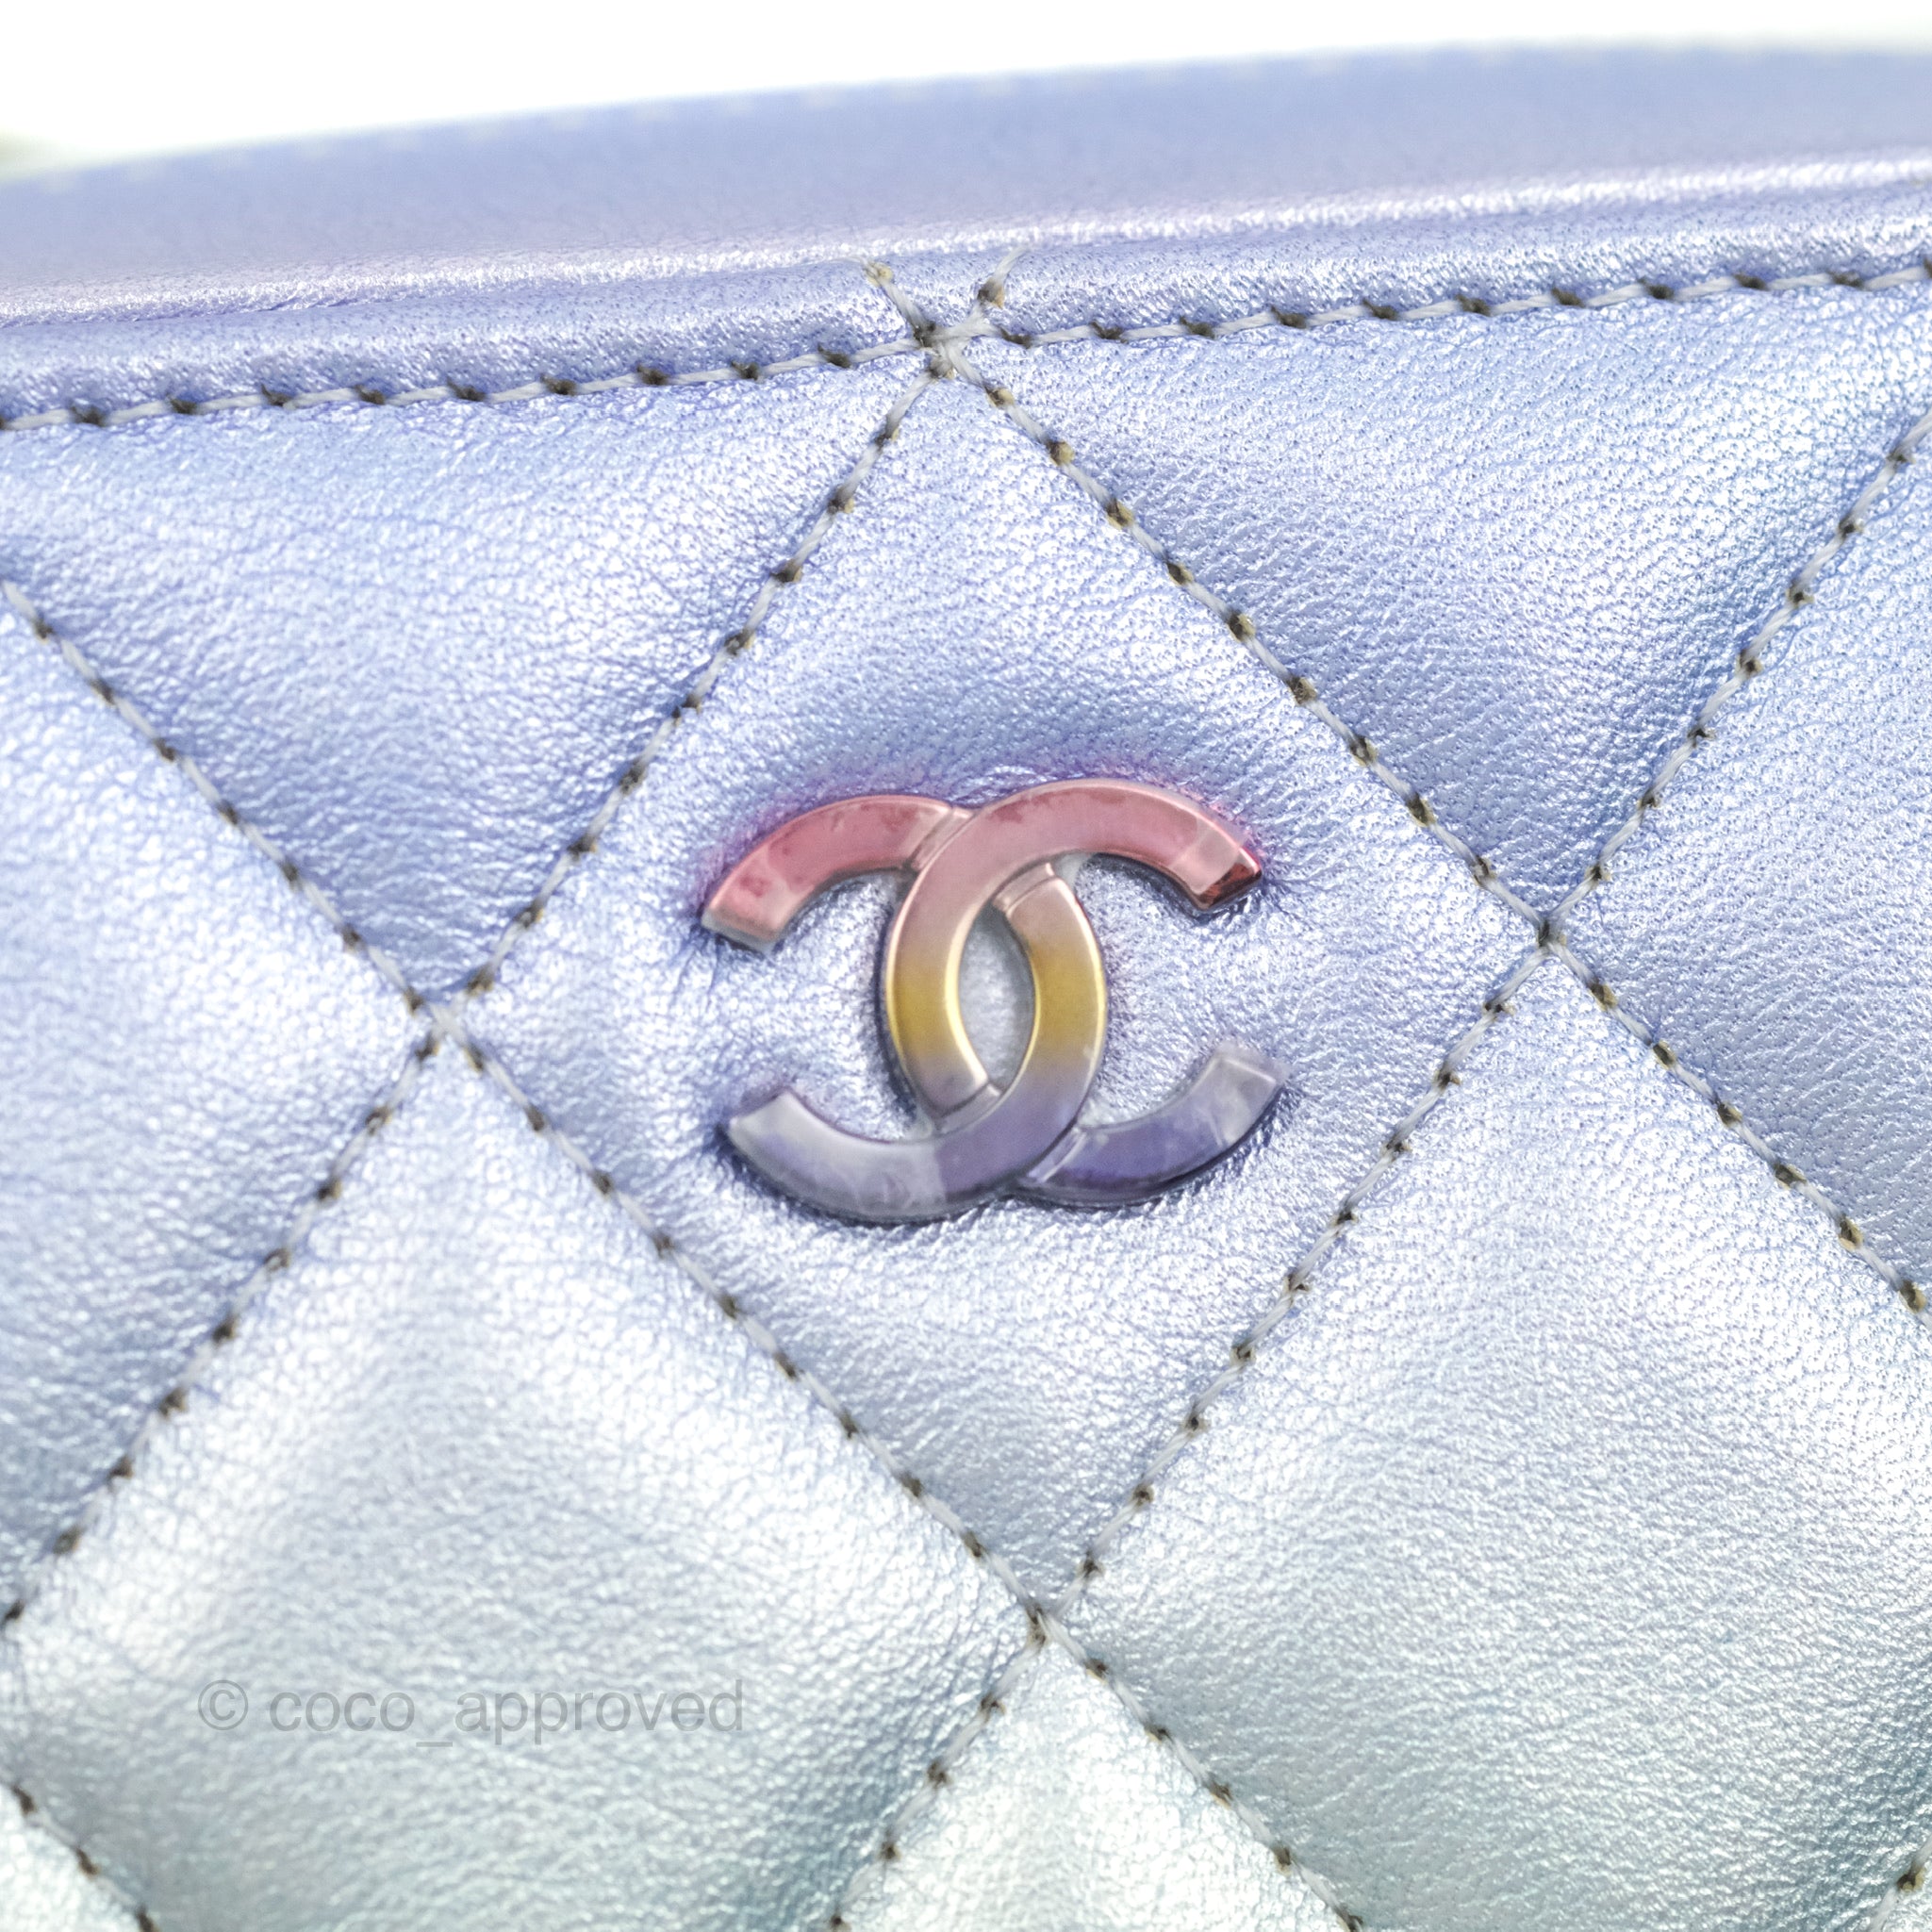 Chanel Gradient Metallic Quilted Lambskin Glasses Case on Chain Iridescent Hardware, 2021 (Like New), Pink/Green Womens Handbag